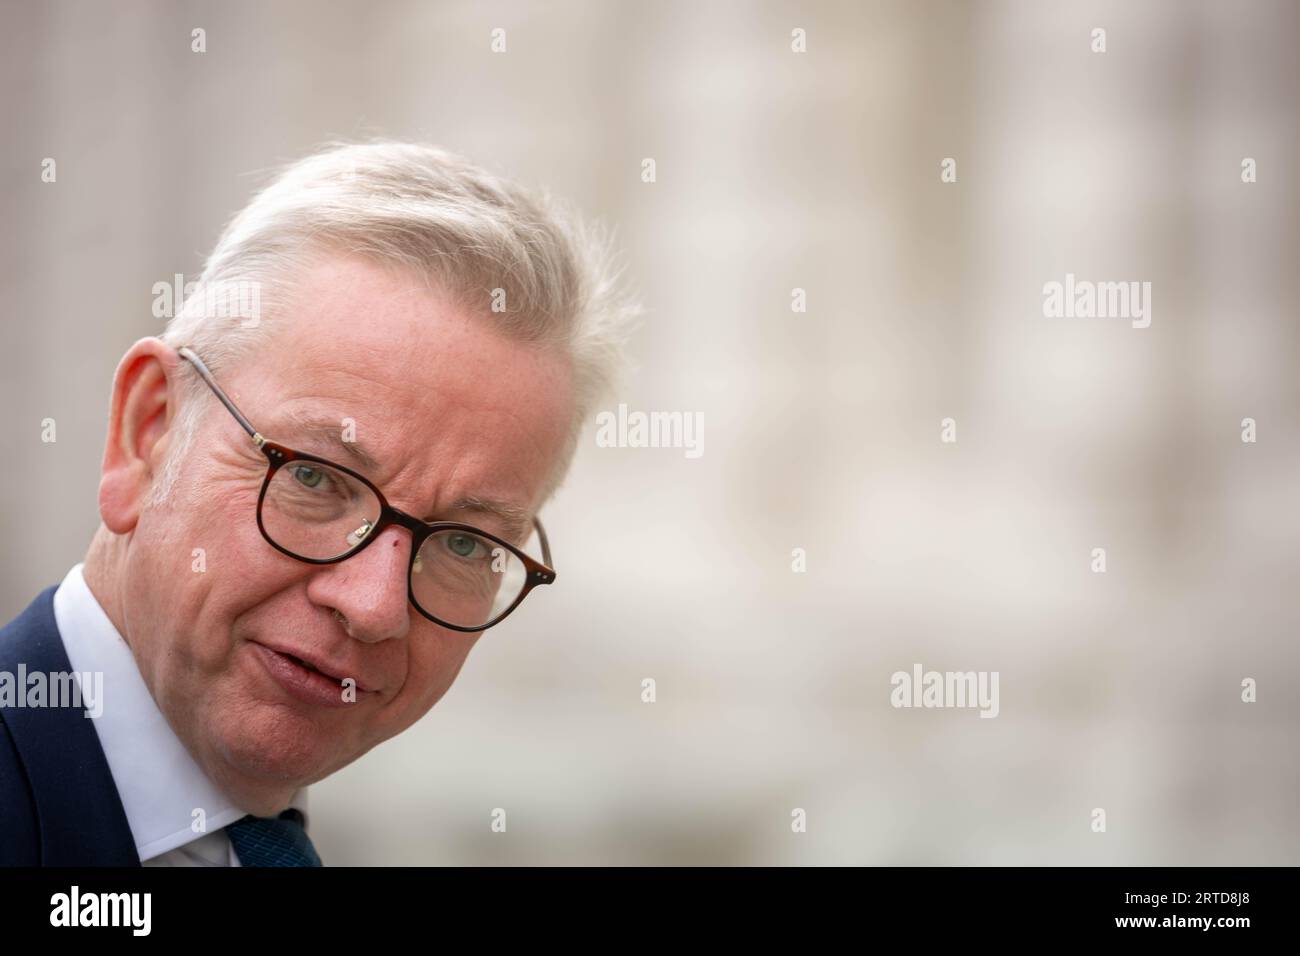 London 12 Sep 2023 Ministers at the Cabinet office 70 Whitehall London UK It is understood that a number of meetings were held to consider the alleged China spy case. Michael Gove, Levelling Up Secretary, Credit: Ian Davidson/Alamy Live News Stock Photo